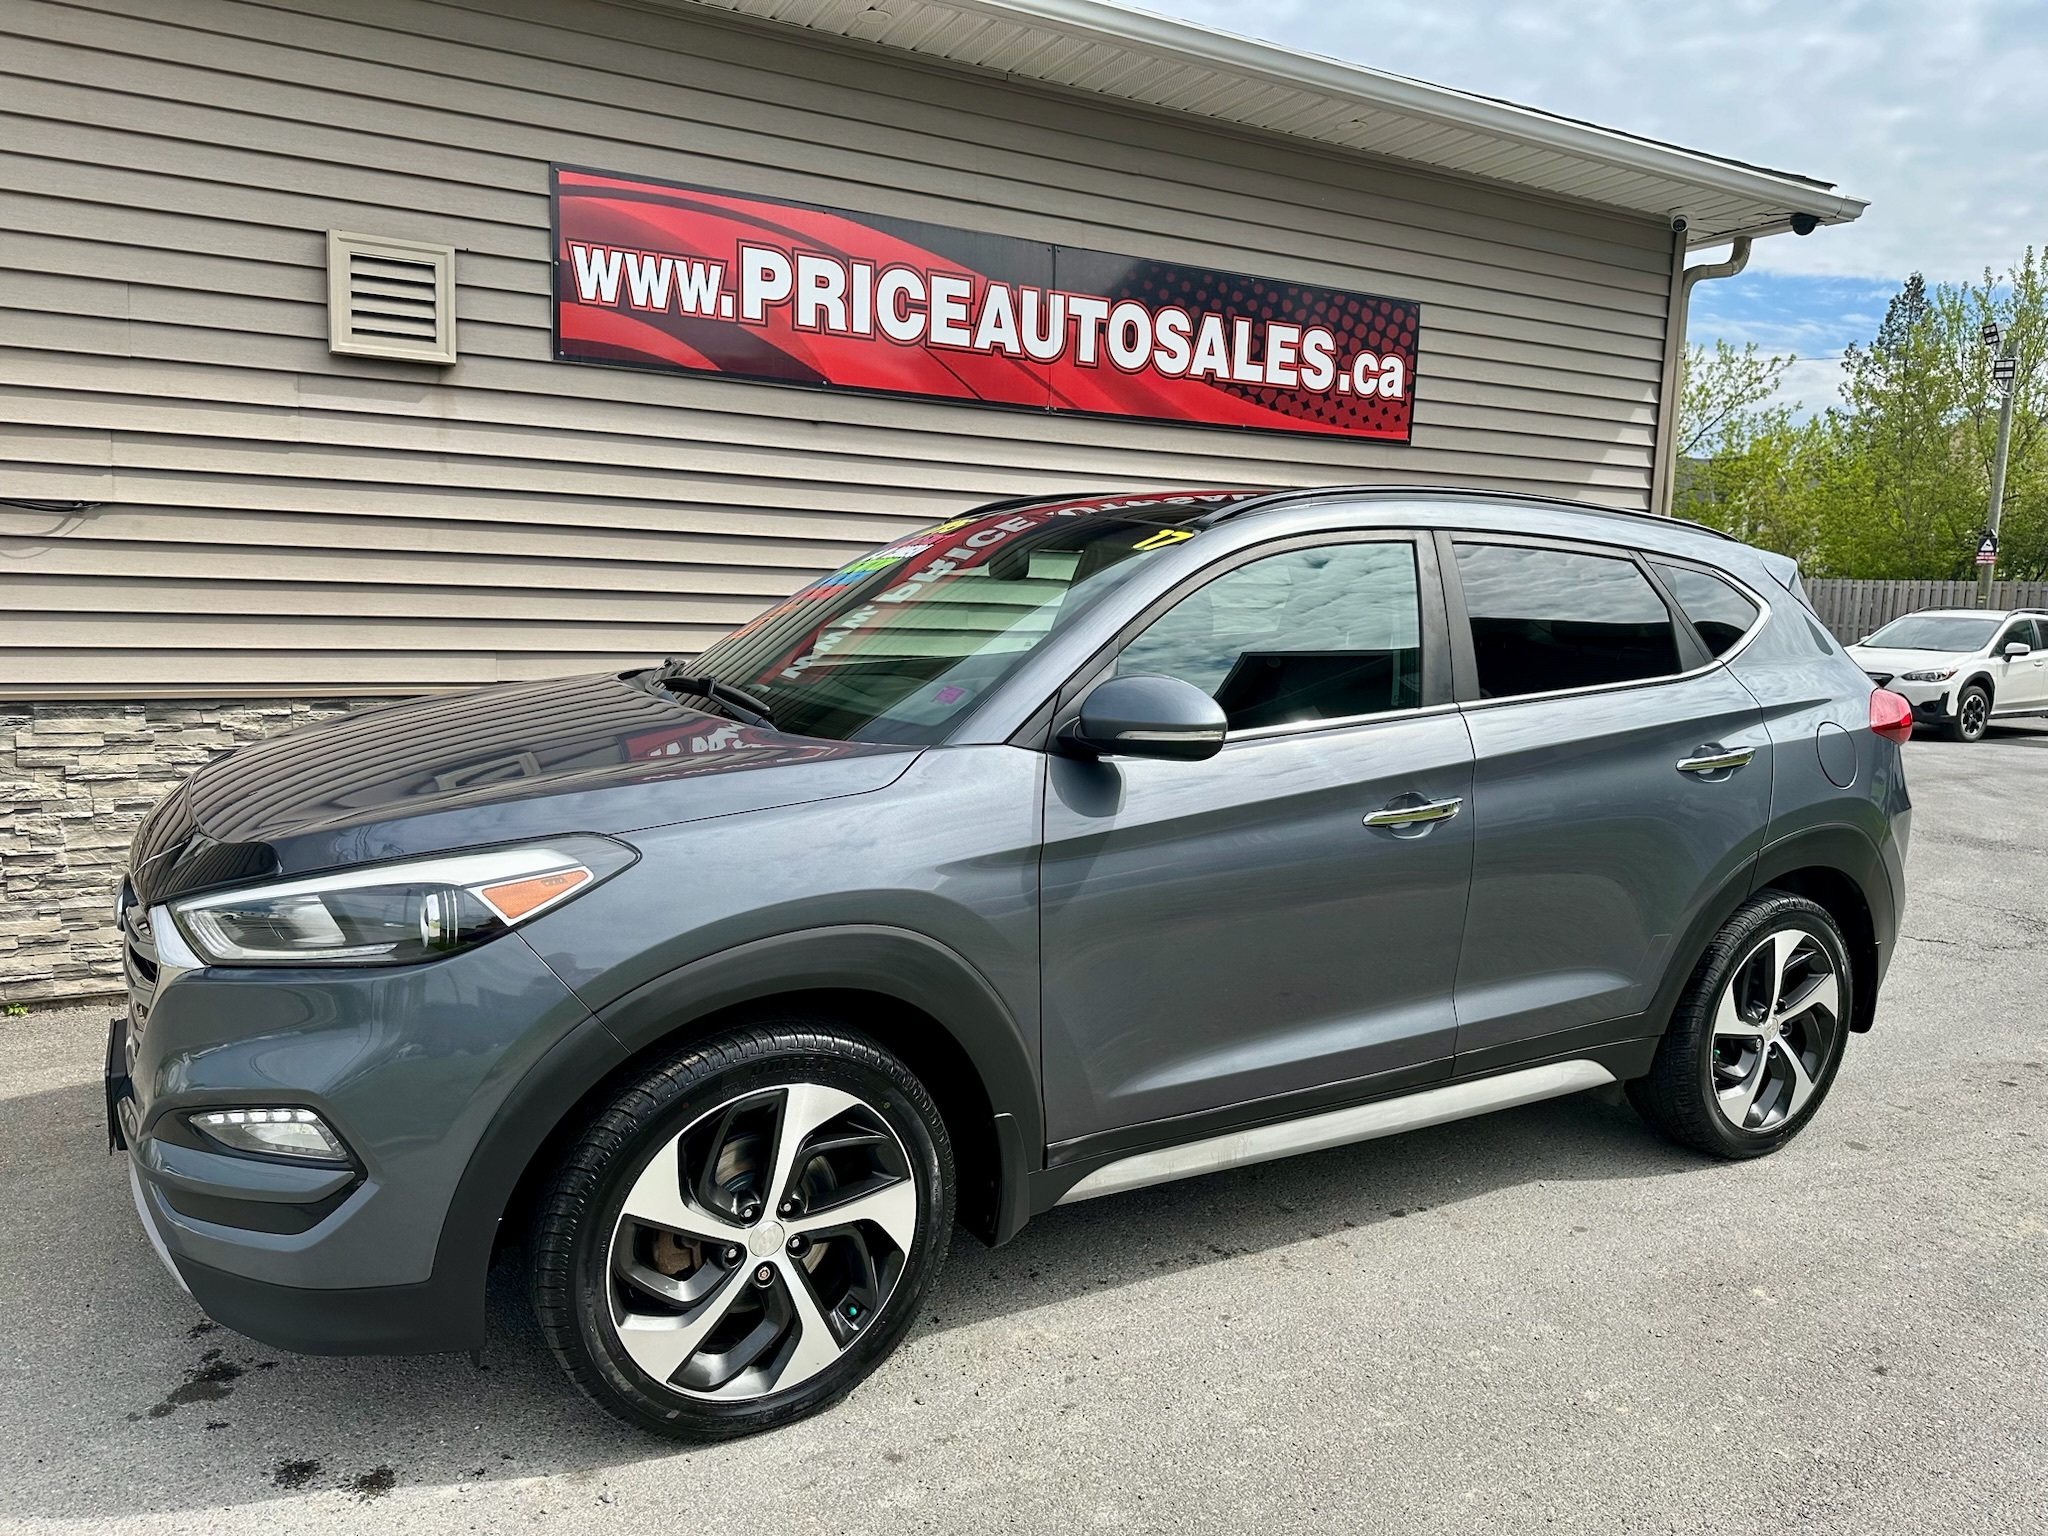 2017 Hyundai Tucson AWD 1.6L Ultimate - every option possible!!!